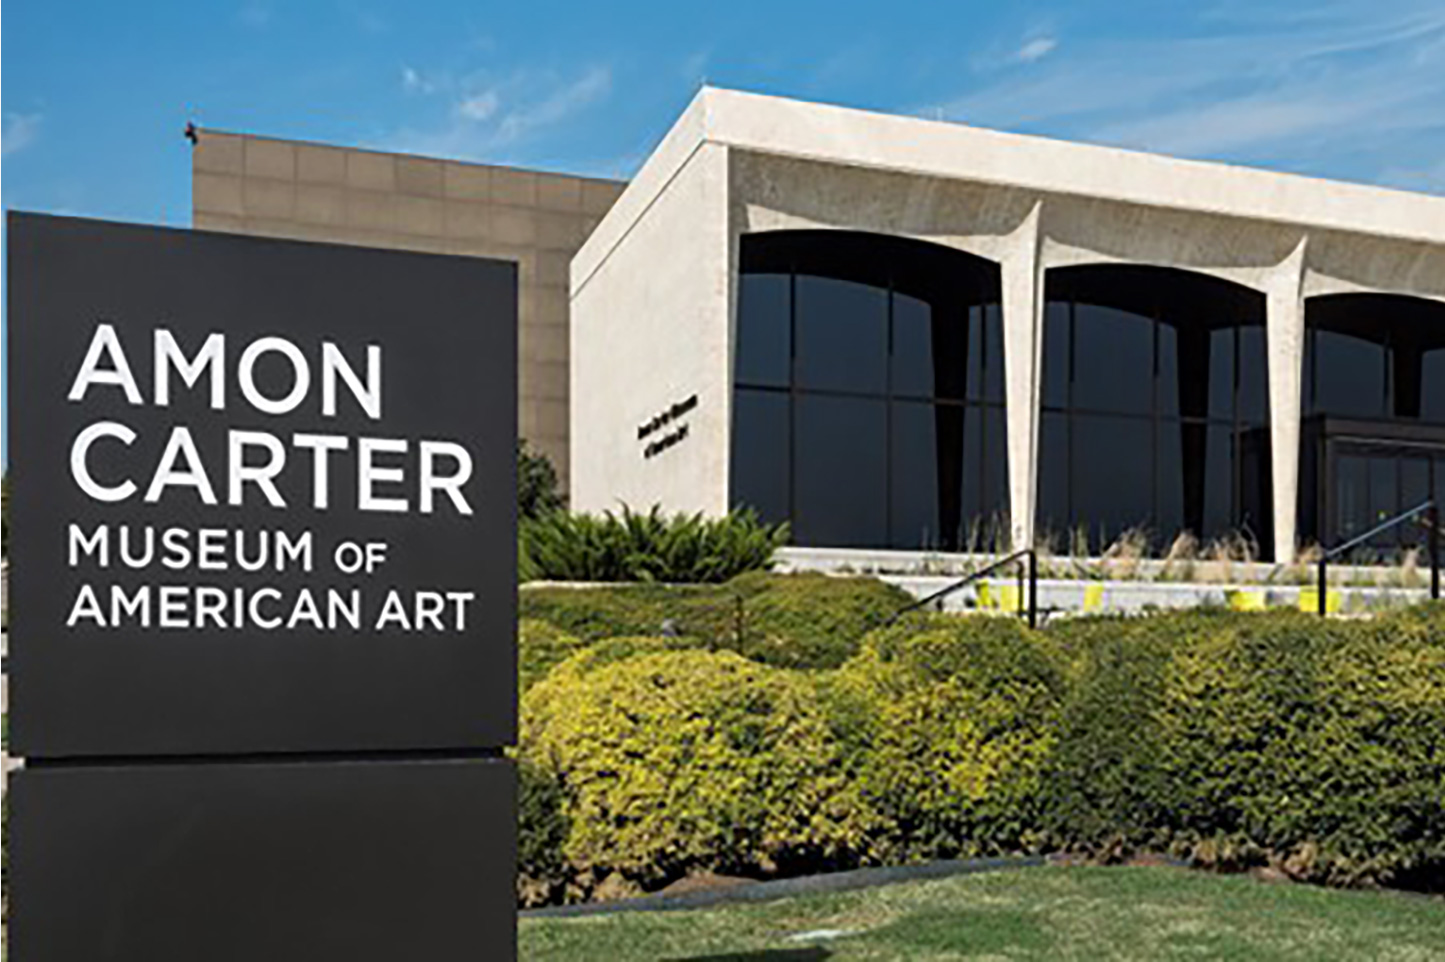 outside view of the amon carter museum of american art